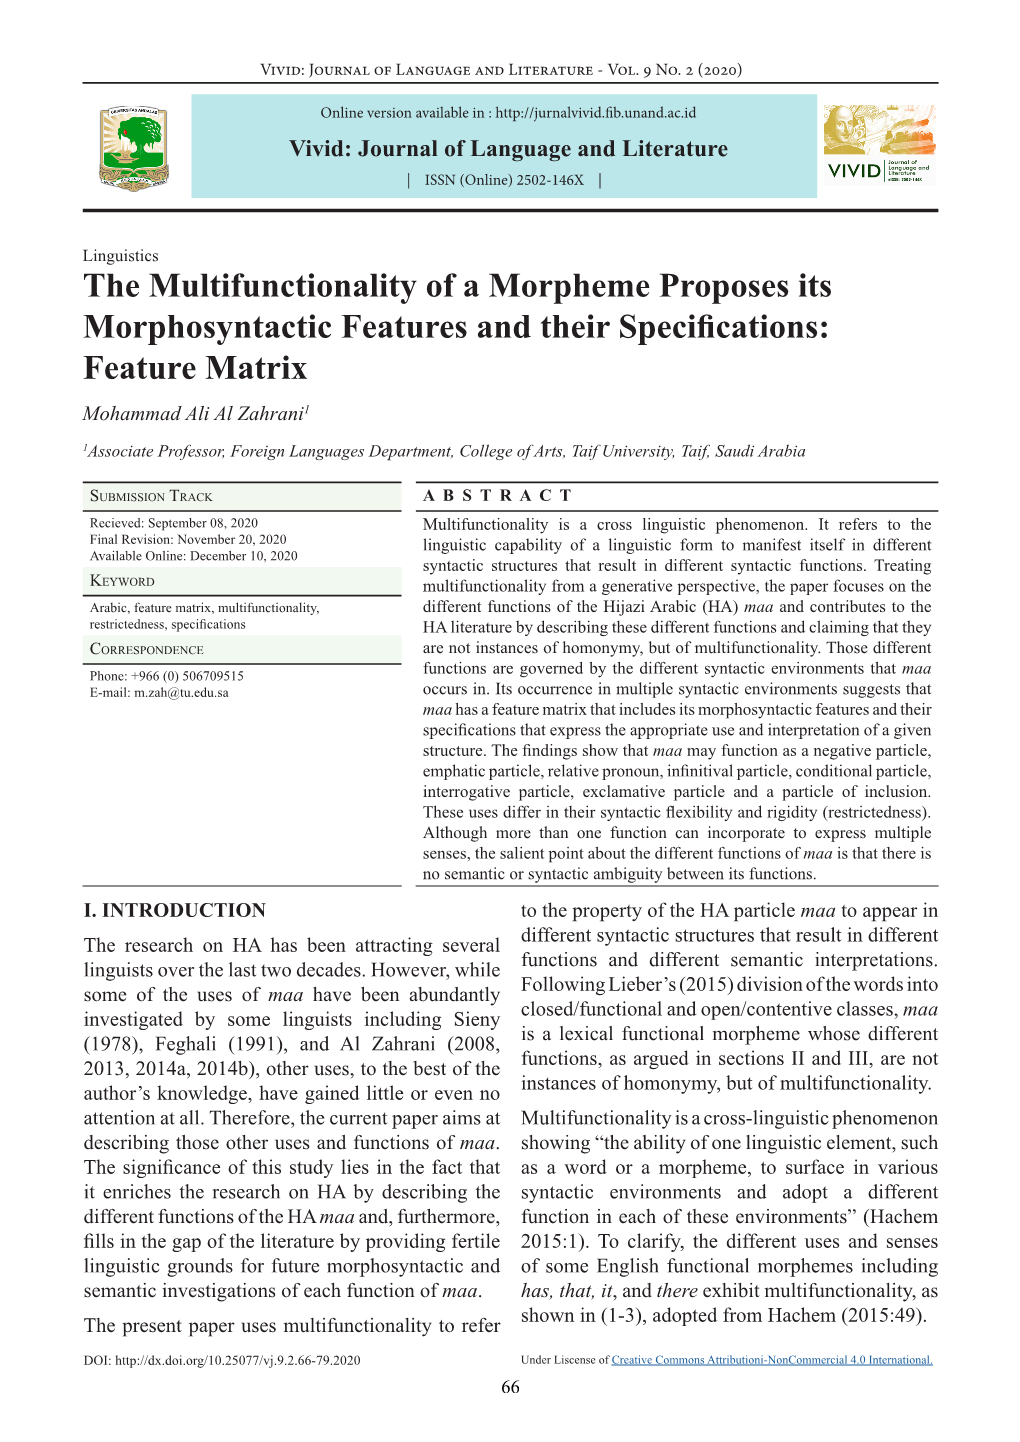 The Multifunctionality of a Morpheme Proposes Its Morphosyntactic Features and Their Specifications: Feature Matrix Mohammad Ali Al Zahrani1